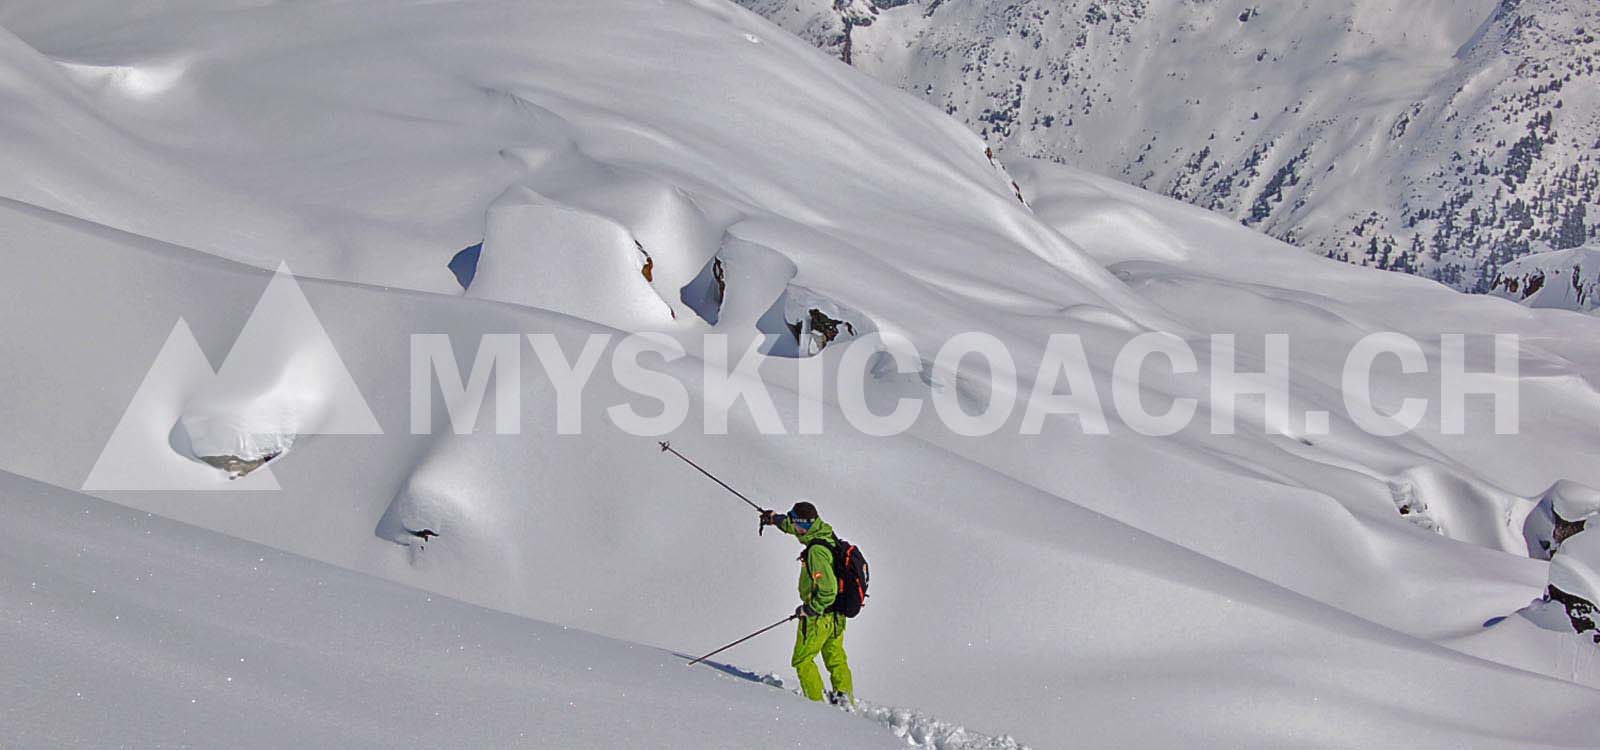 FORMATION FREERIDE ¦ cours prive freeride hors piste adulte ¦ MySkiCoach.ch